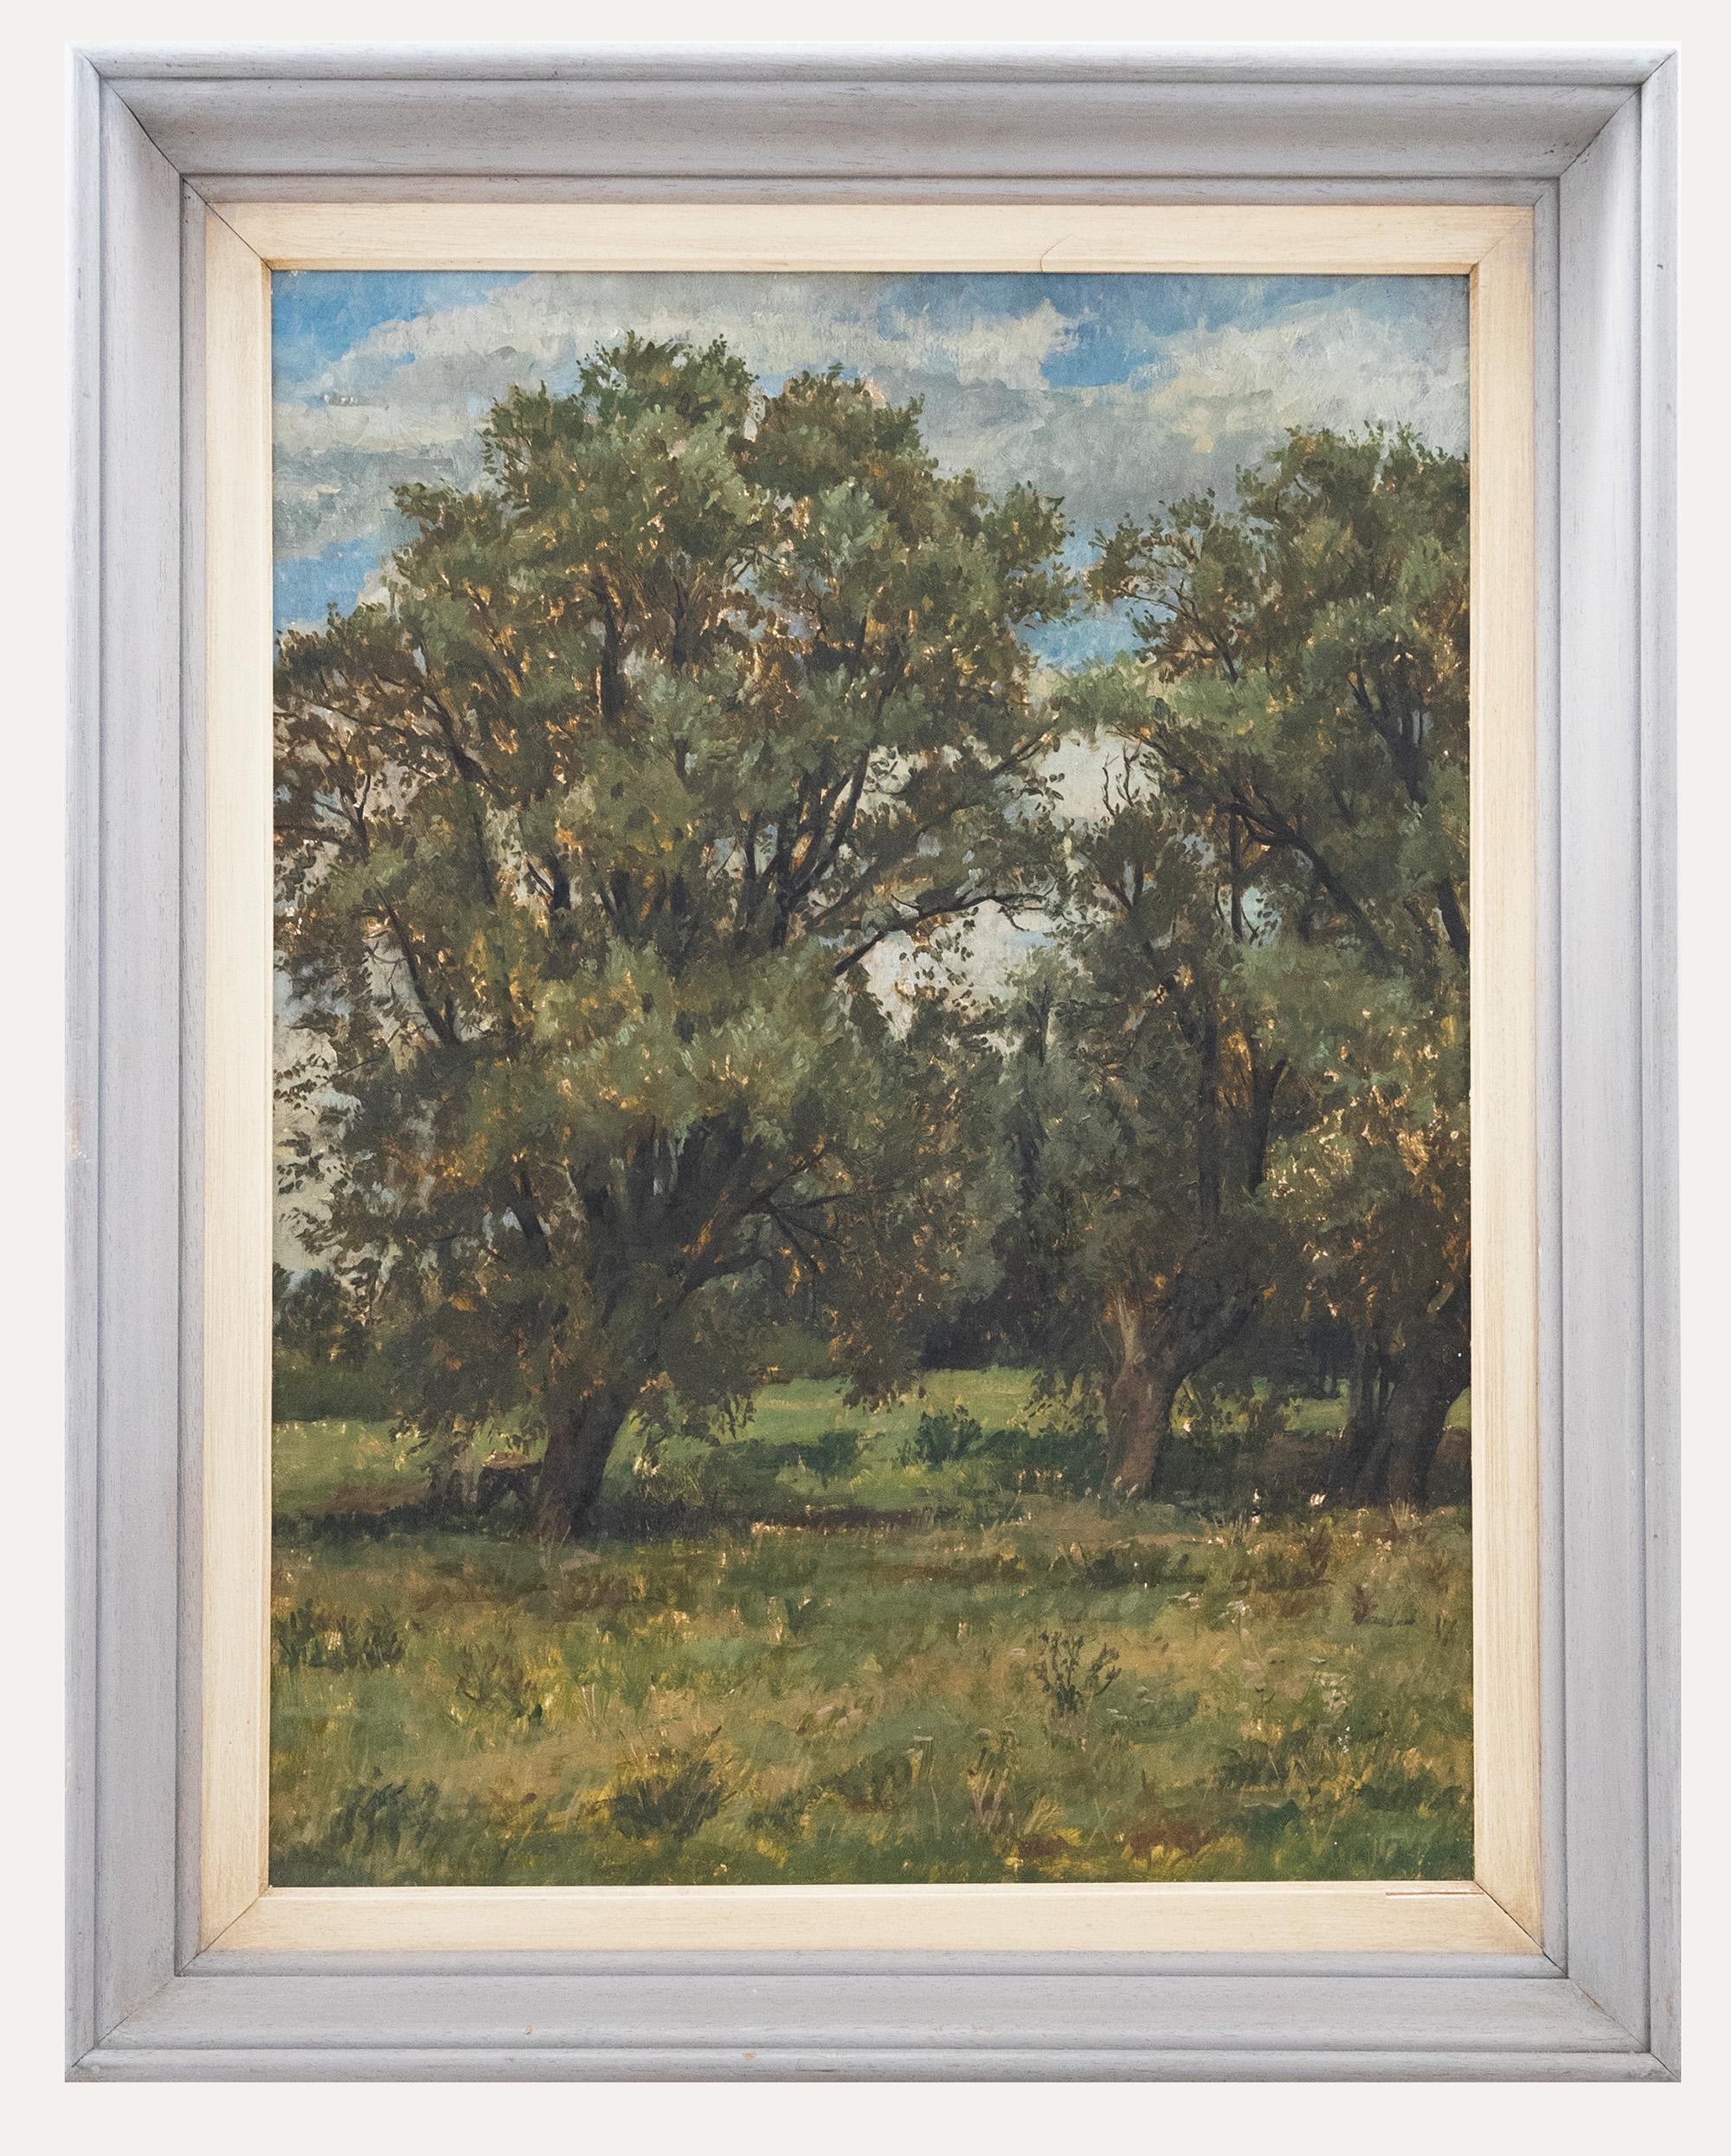 Unknown Landscape Painting - Framed 20th Century Oil - View of Trees